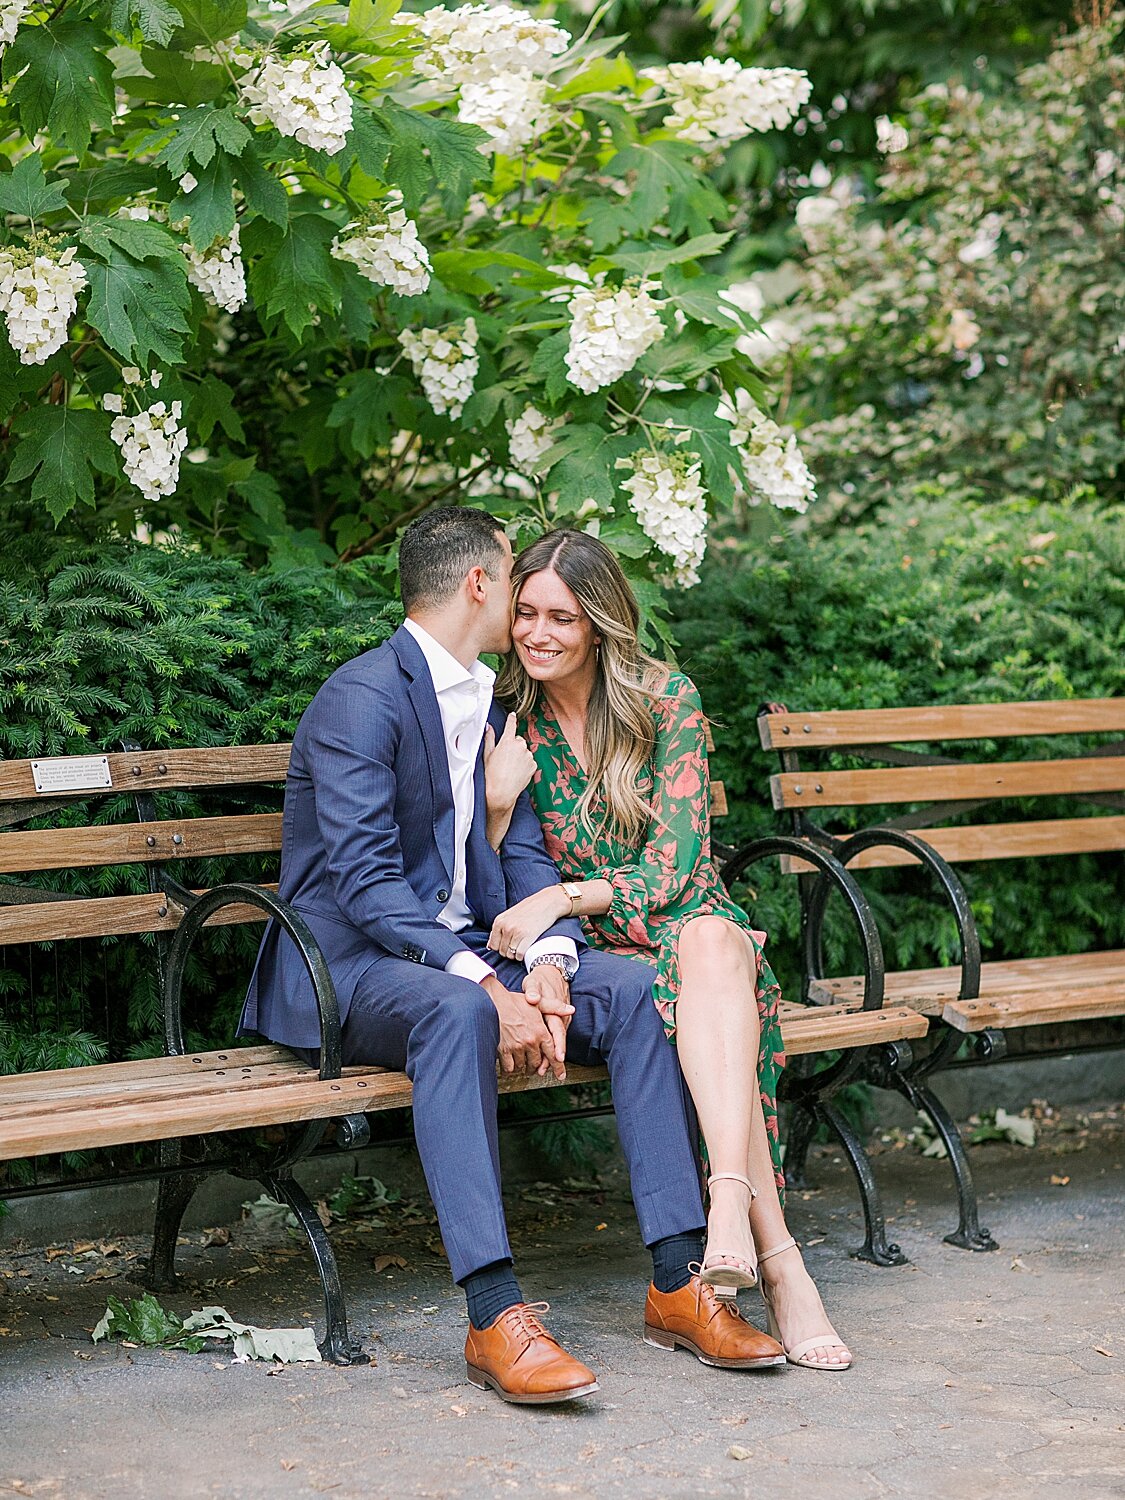 New York City park engagement session | Asher Gardner Photography | The Village engagement session